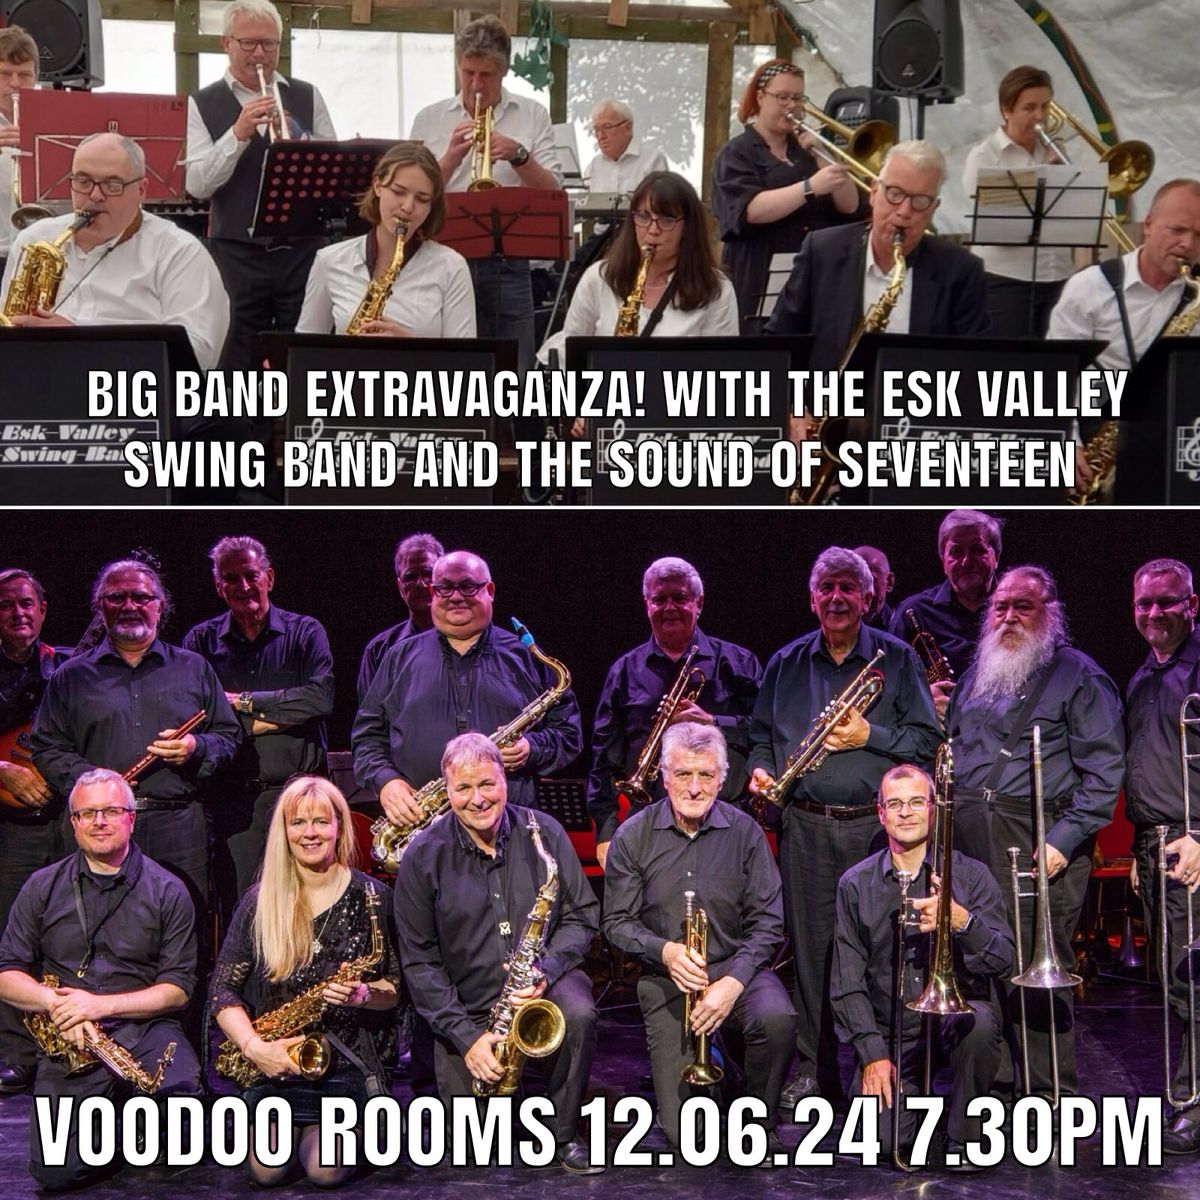 Big Band Extravaganza with the Esk Valley Swing Band and the Sound of 17